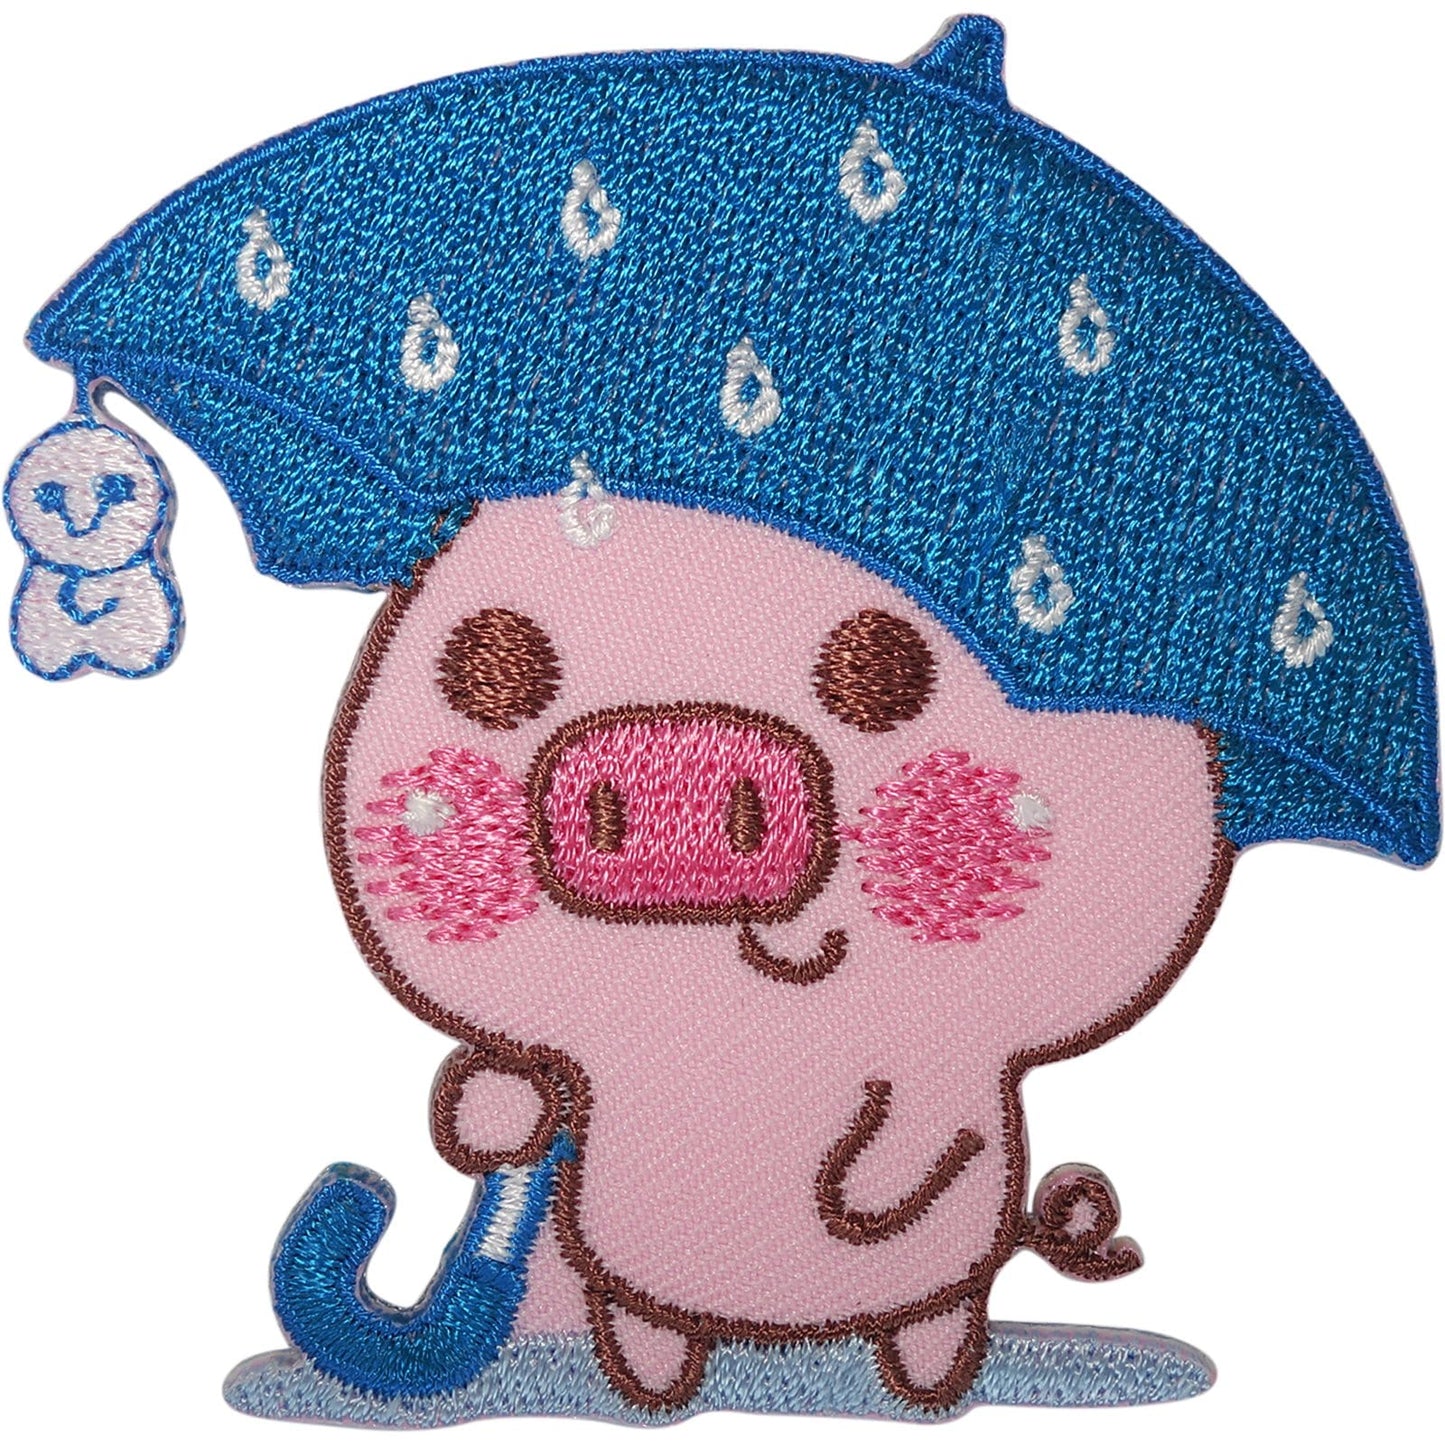 Pig Umbrella Patch Iron Sew On T Shirt Bag Jacket Jeans Dress Embroidered Badge